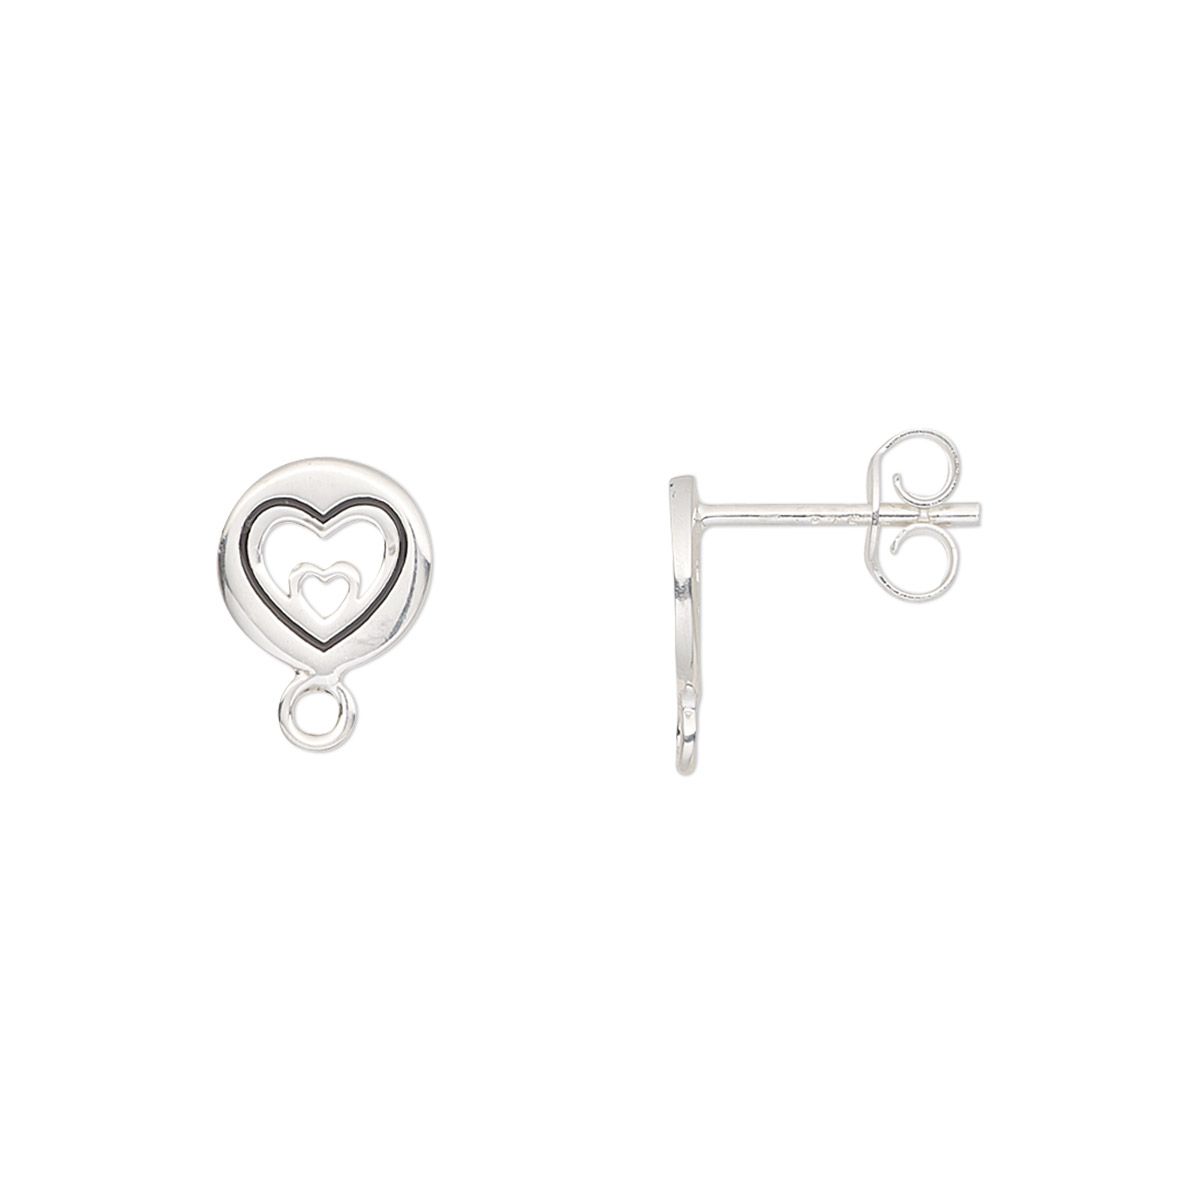 Earstud, enamel and sterling silver, black, 8mm round with cutout heart ...